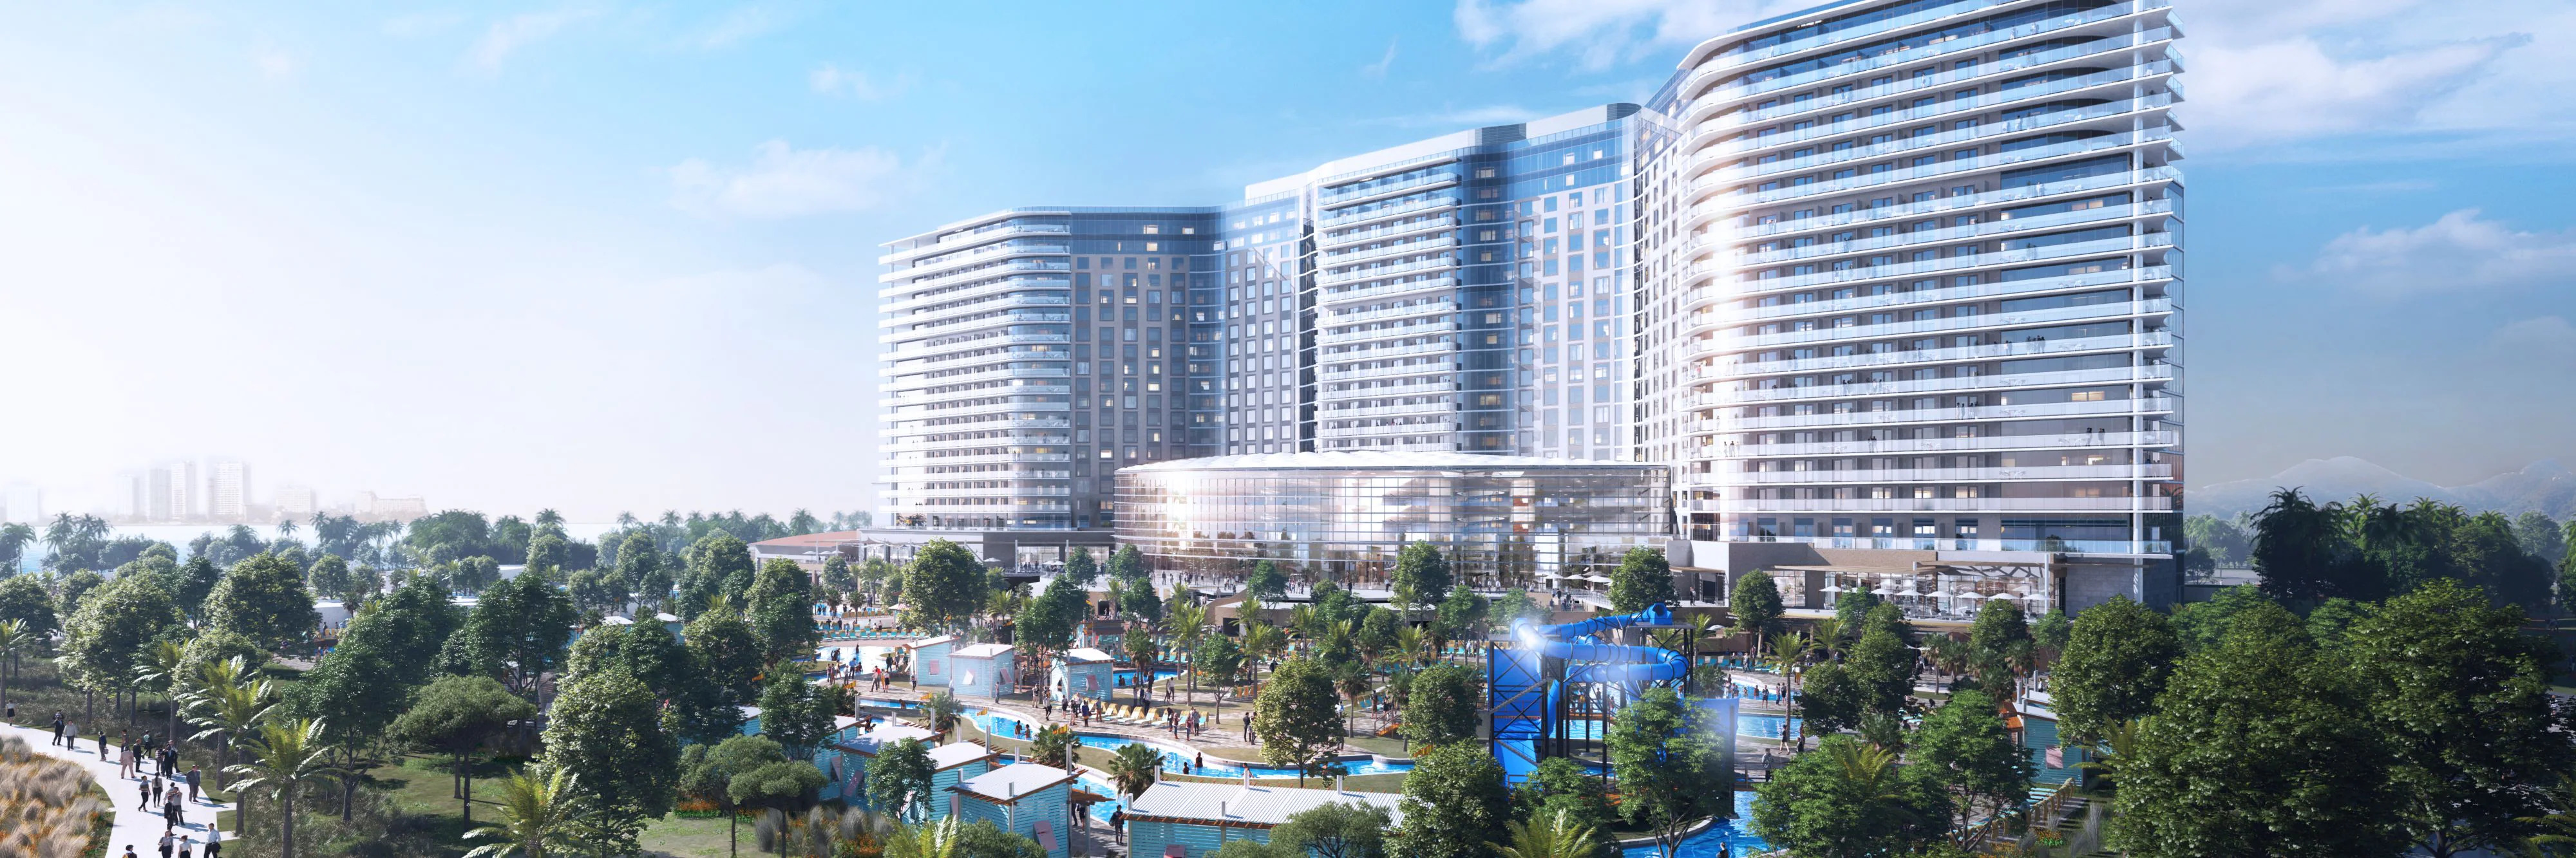 Photo of Gaylord Pacific Resort and Convention Center - Opening 2023, Chula Vista, CA